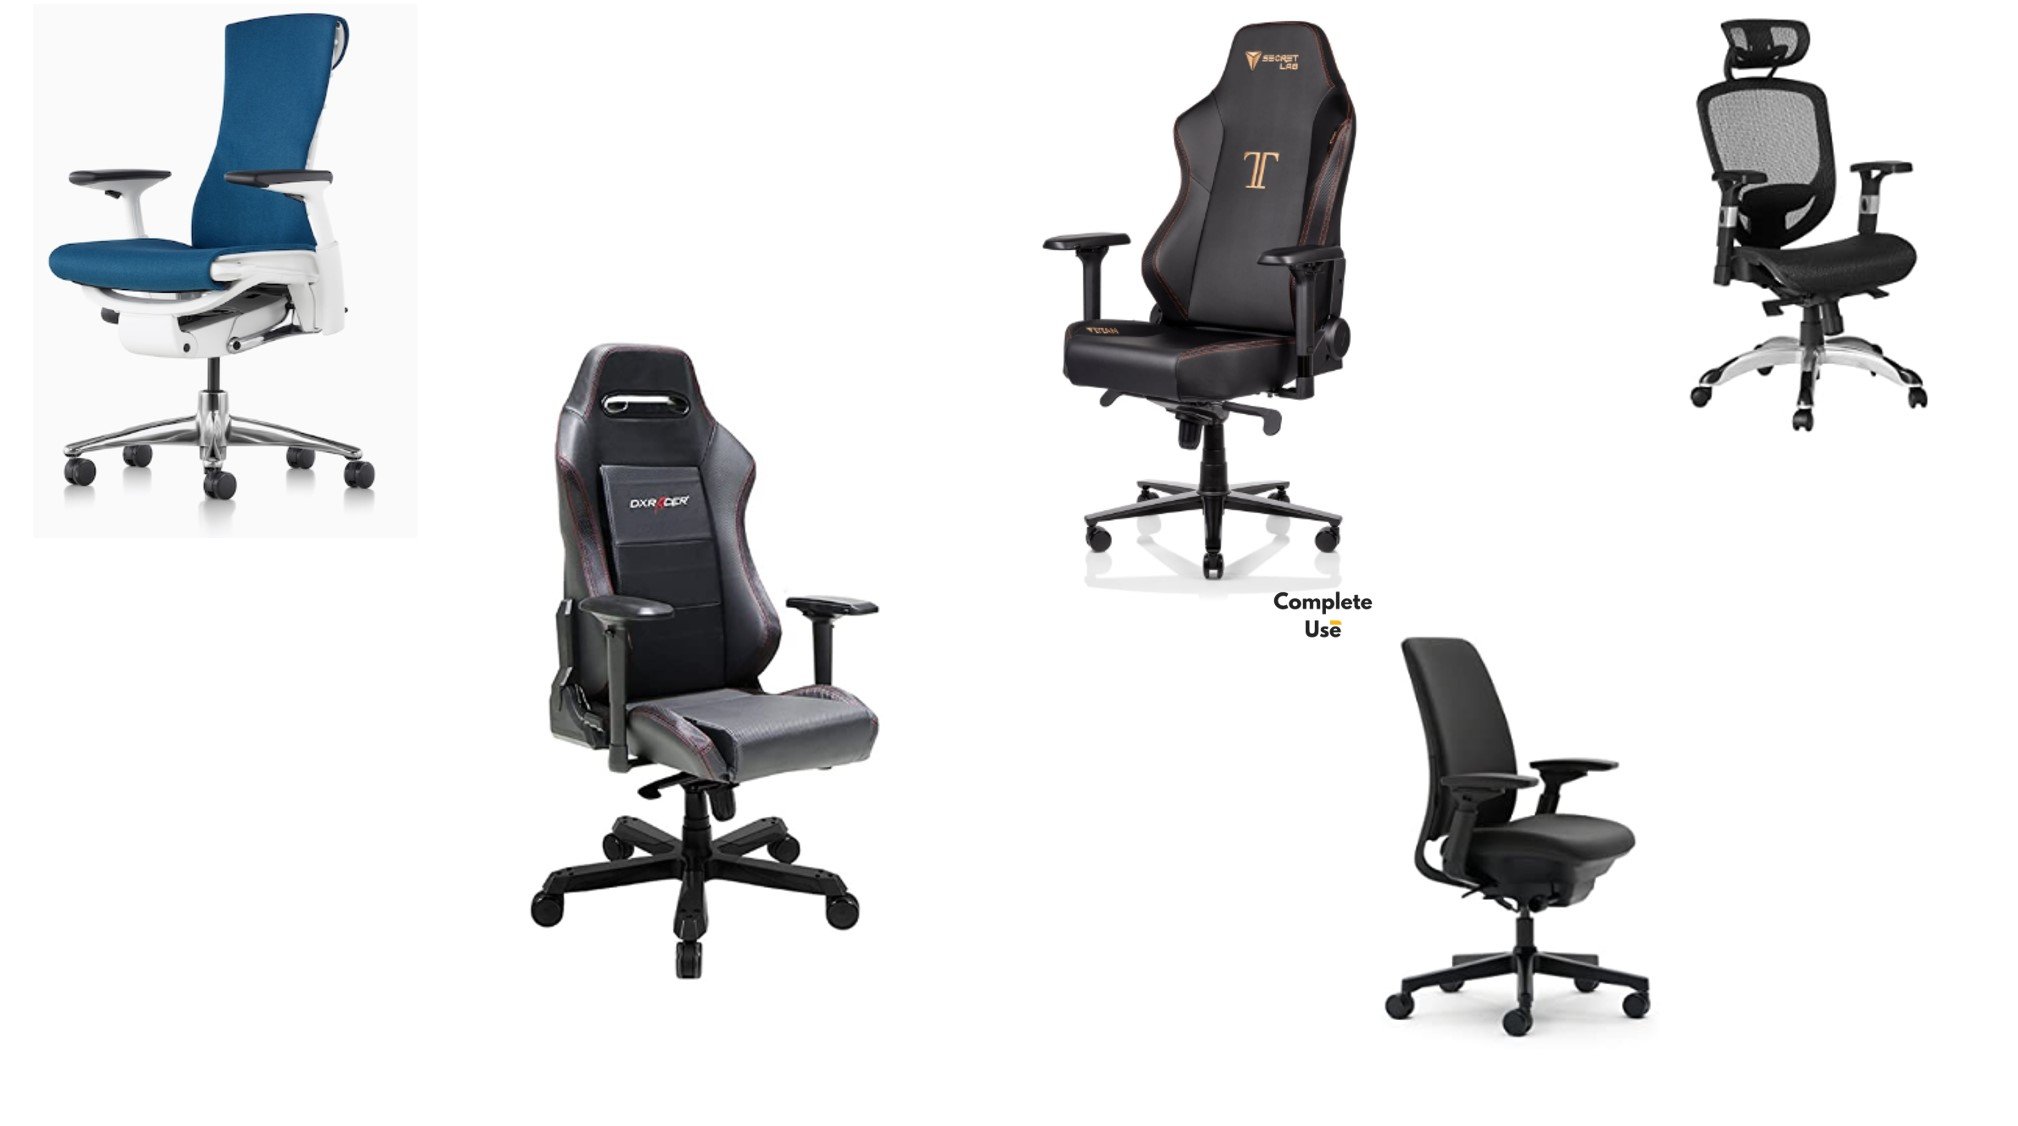 Best Desk Chair for Long Hours and Good Posture